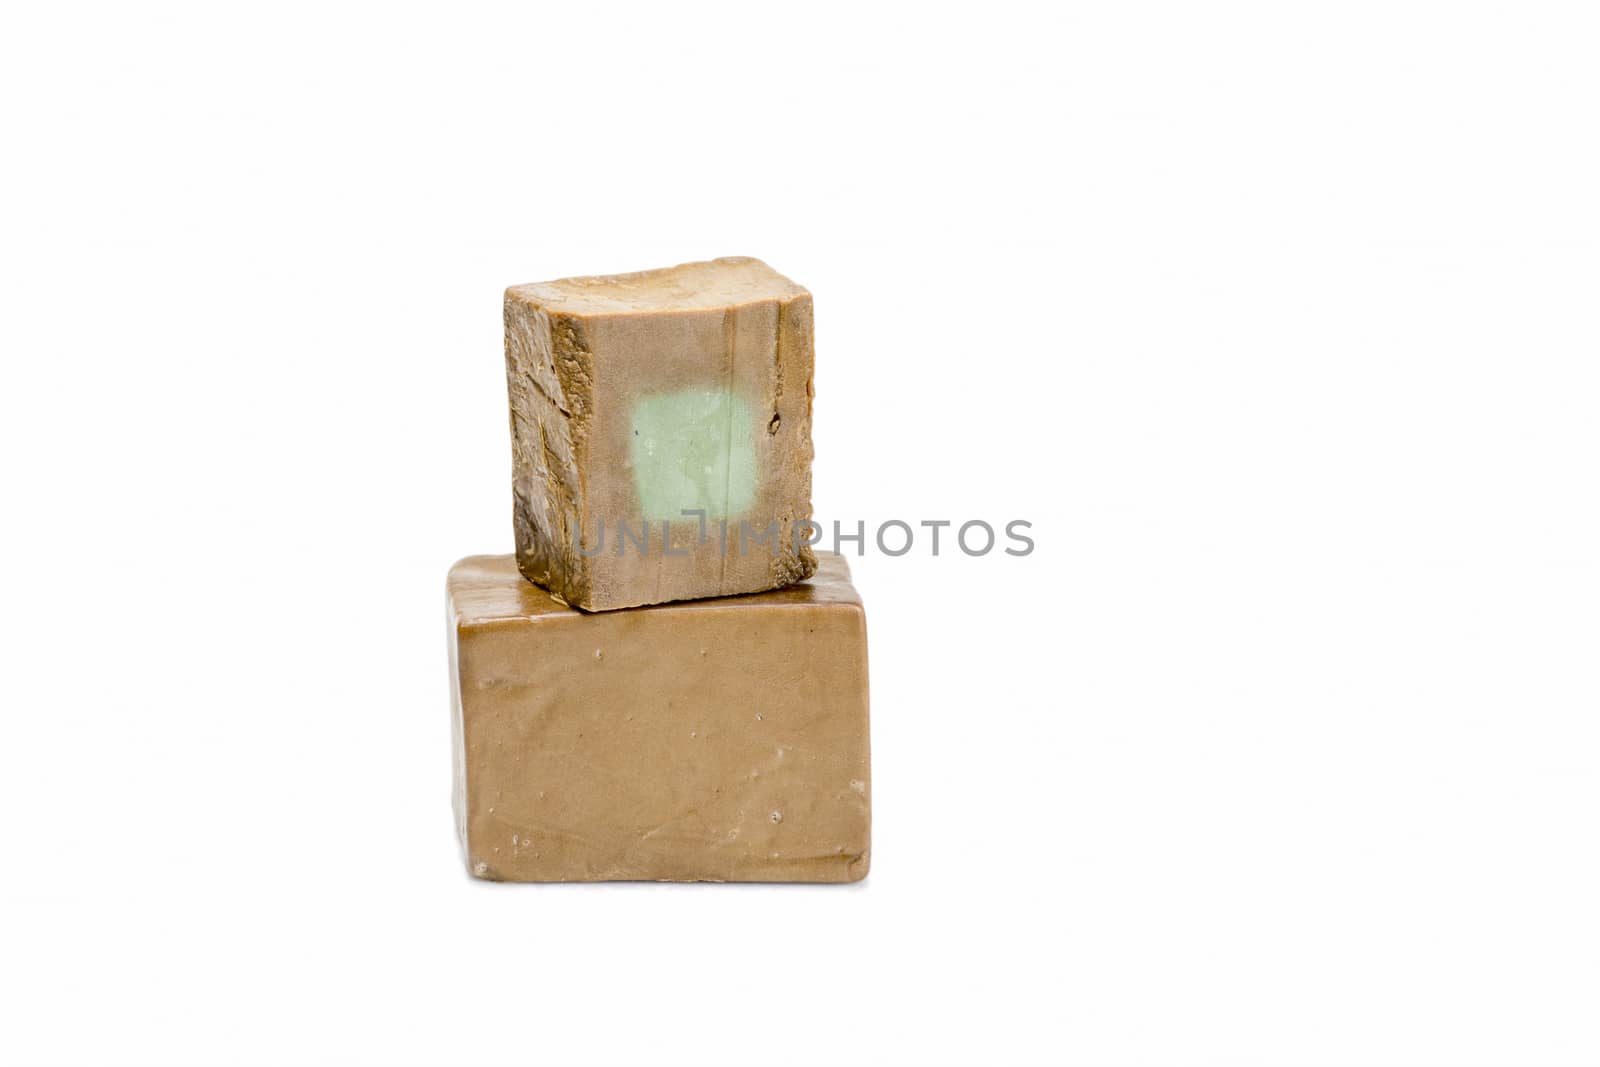 Traditional Hard Olive Soap made in Aleppo (Syria) on white background